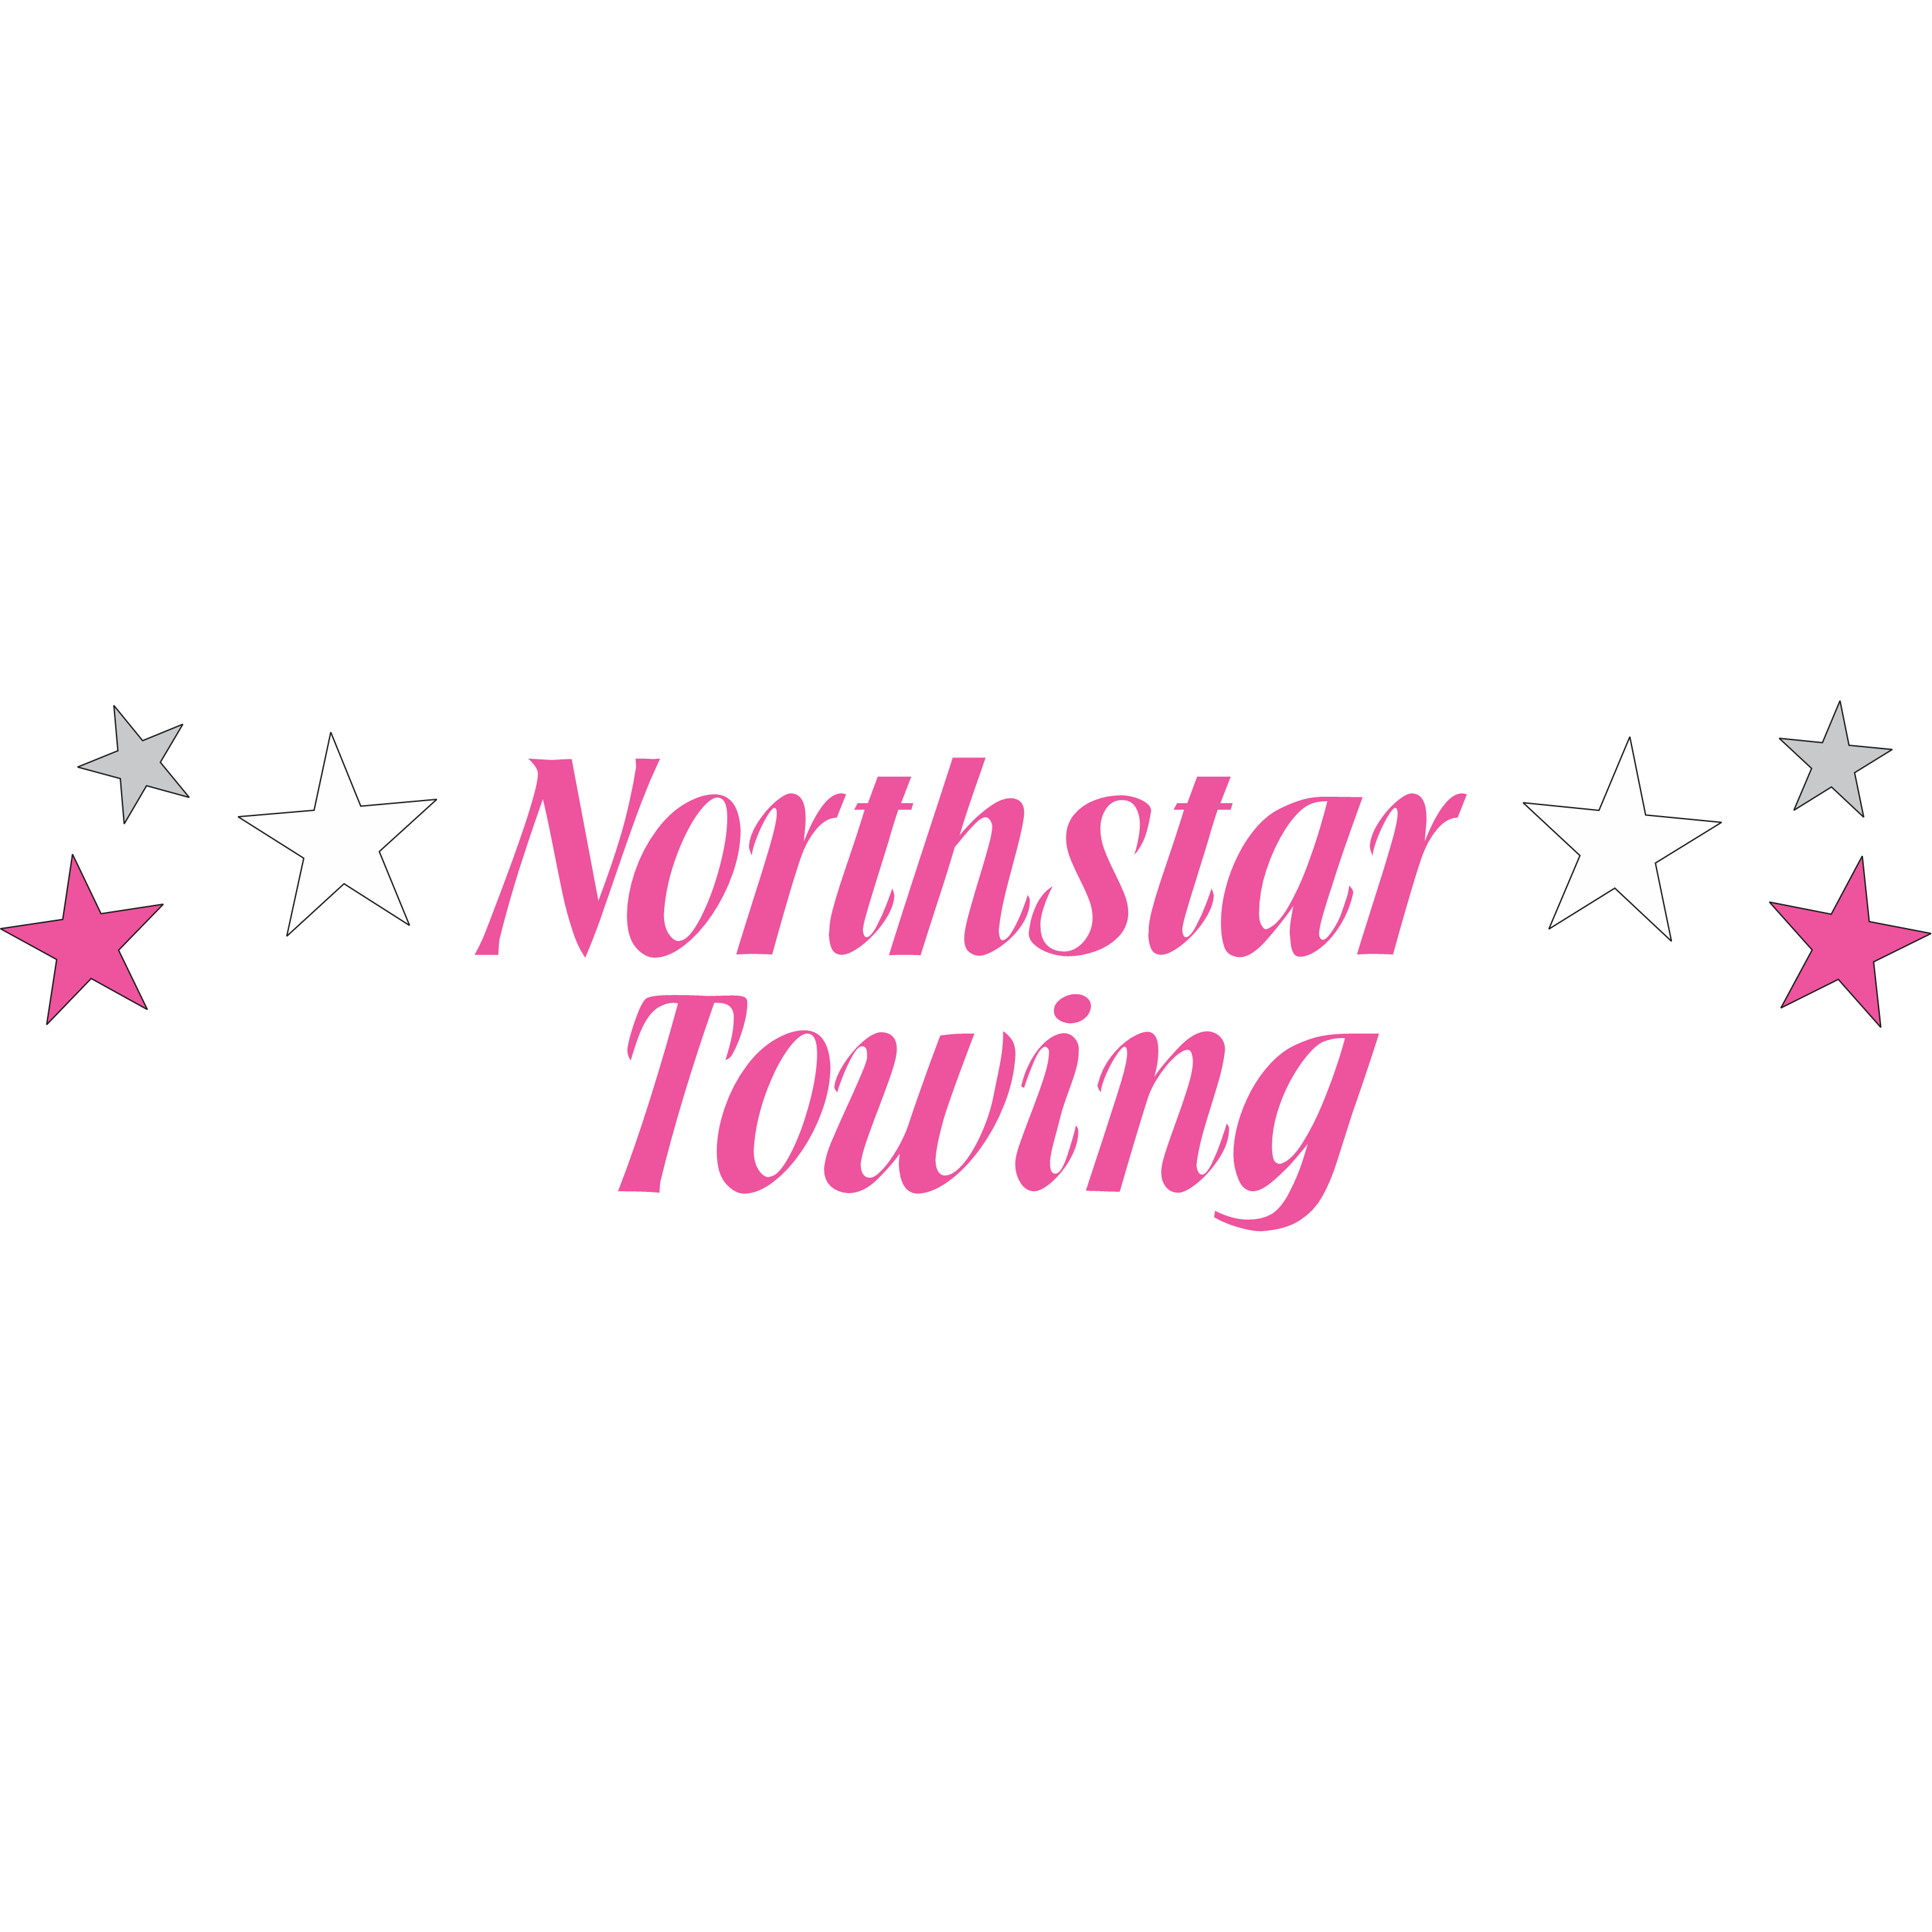 Northstar Towing - Grand Junction, CO 81505 - (970)497-9130 | ShowMeLocal.com